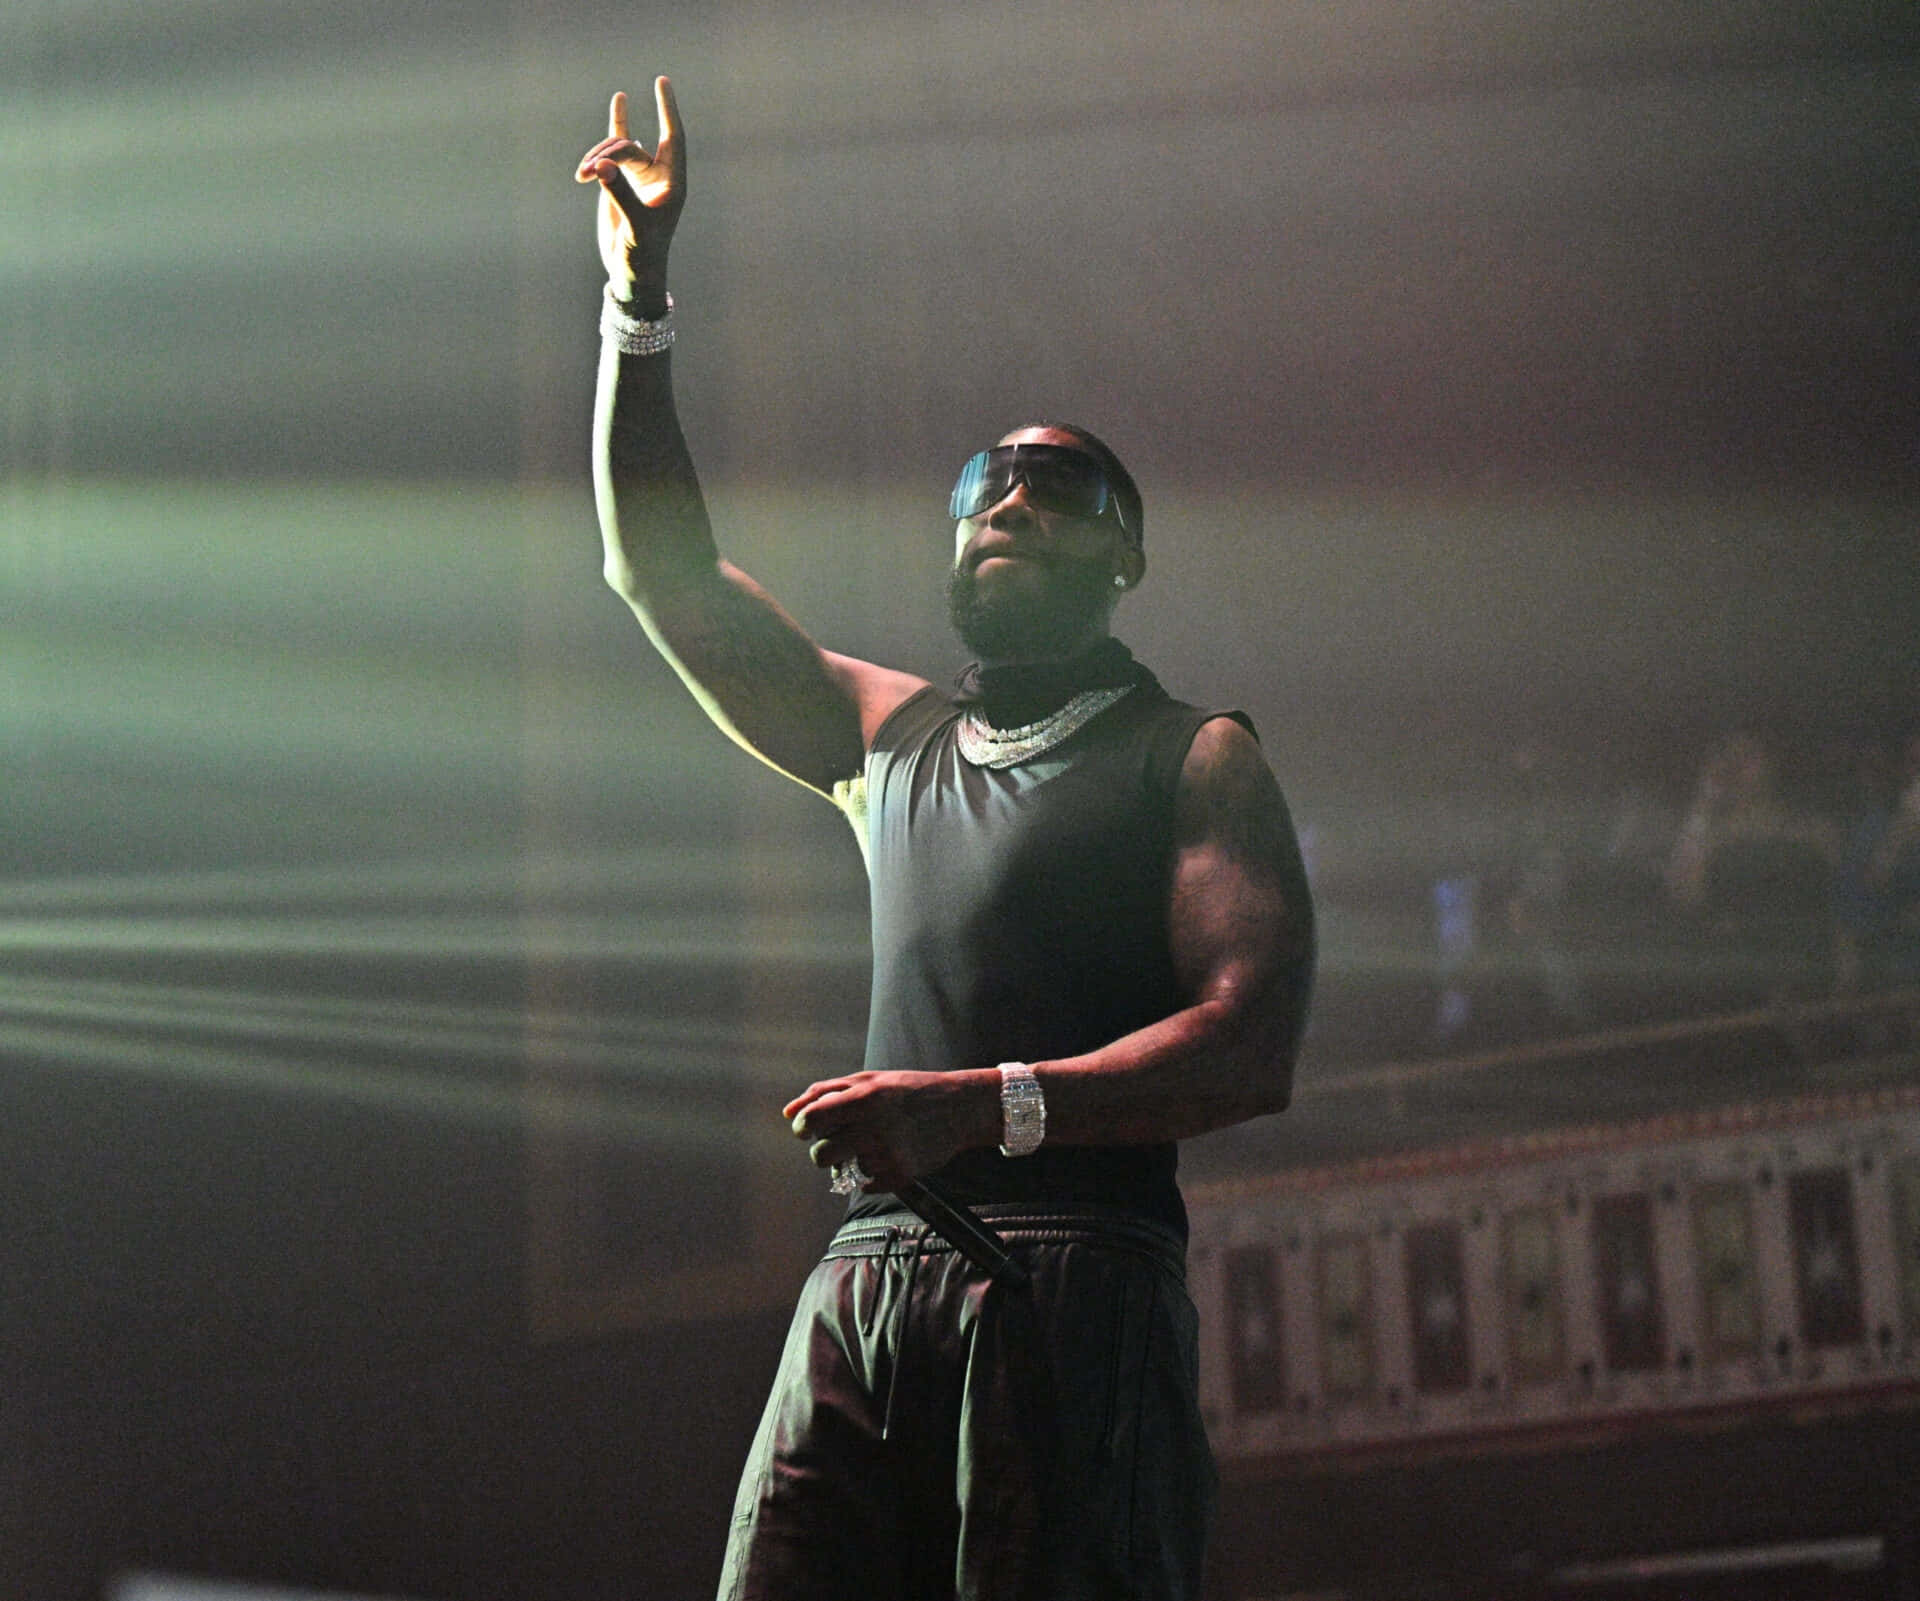 Gucci Mane Performingon Stage Background